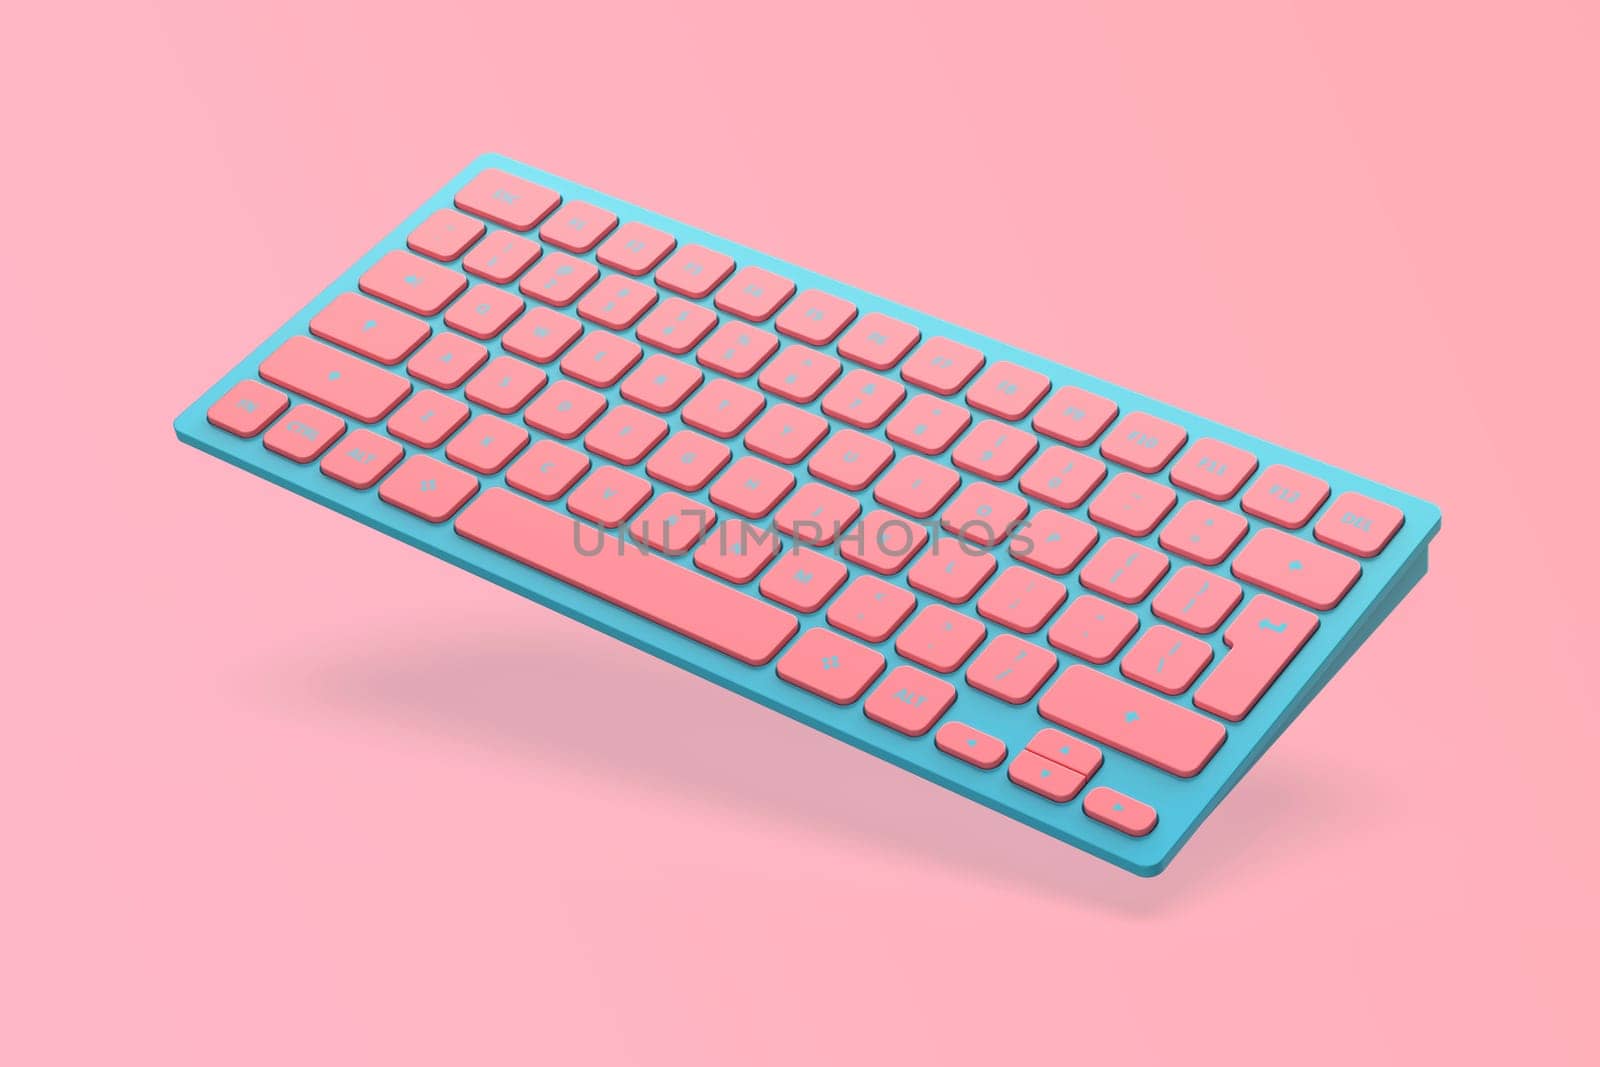 Blue wireless computer keyboard with pink keys by magraphics